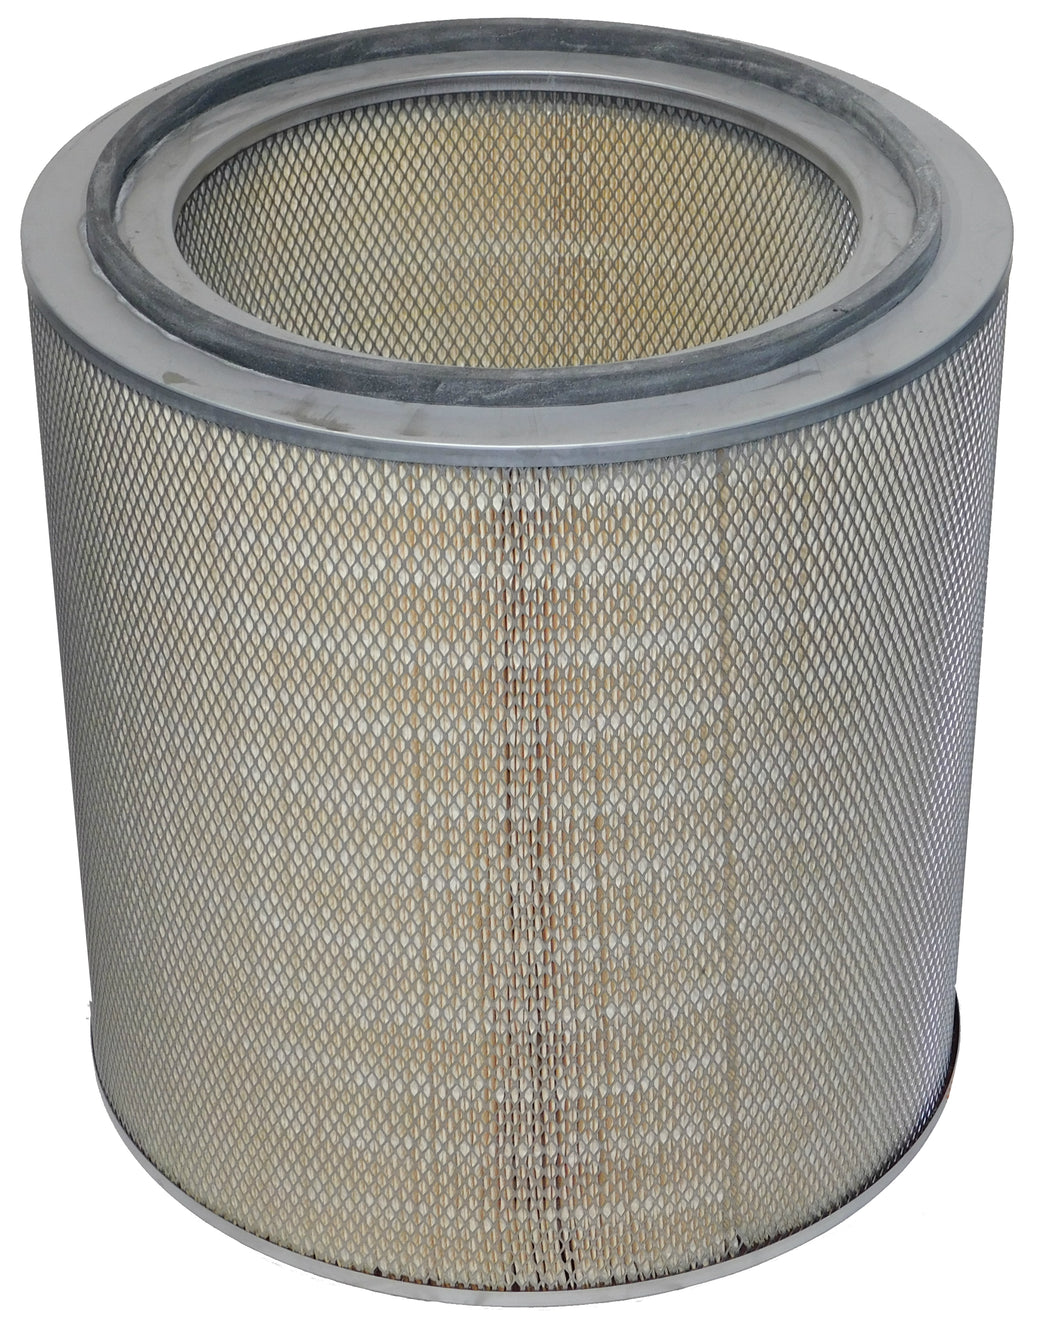 G82-7154 - Guardian - OEM Replacement Filter